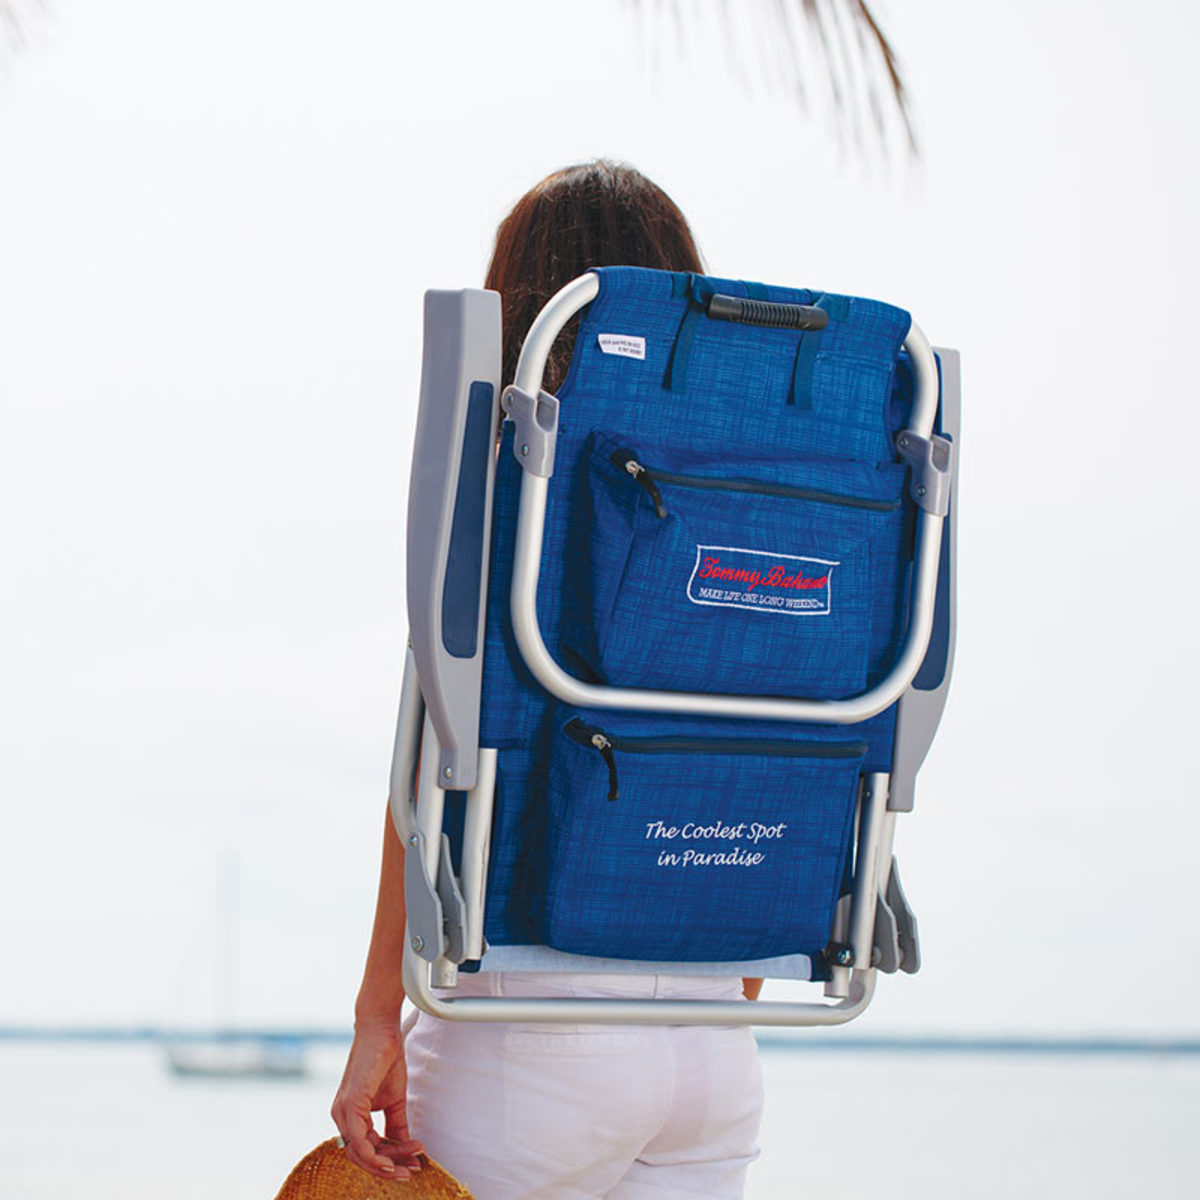 Unique Backpack Beach Chair Costco for Small Space